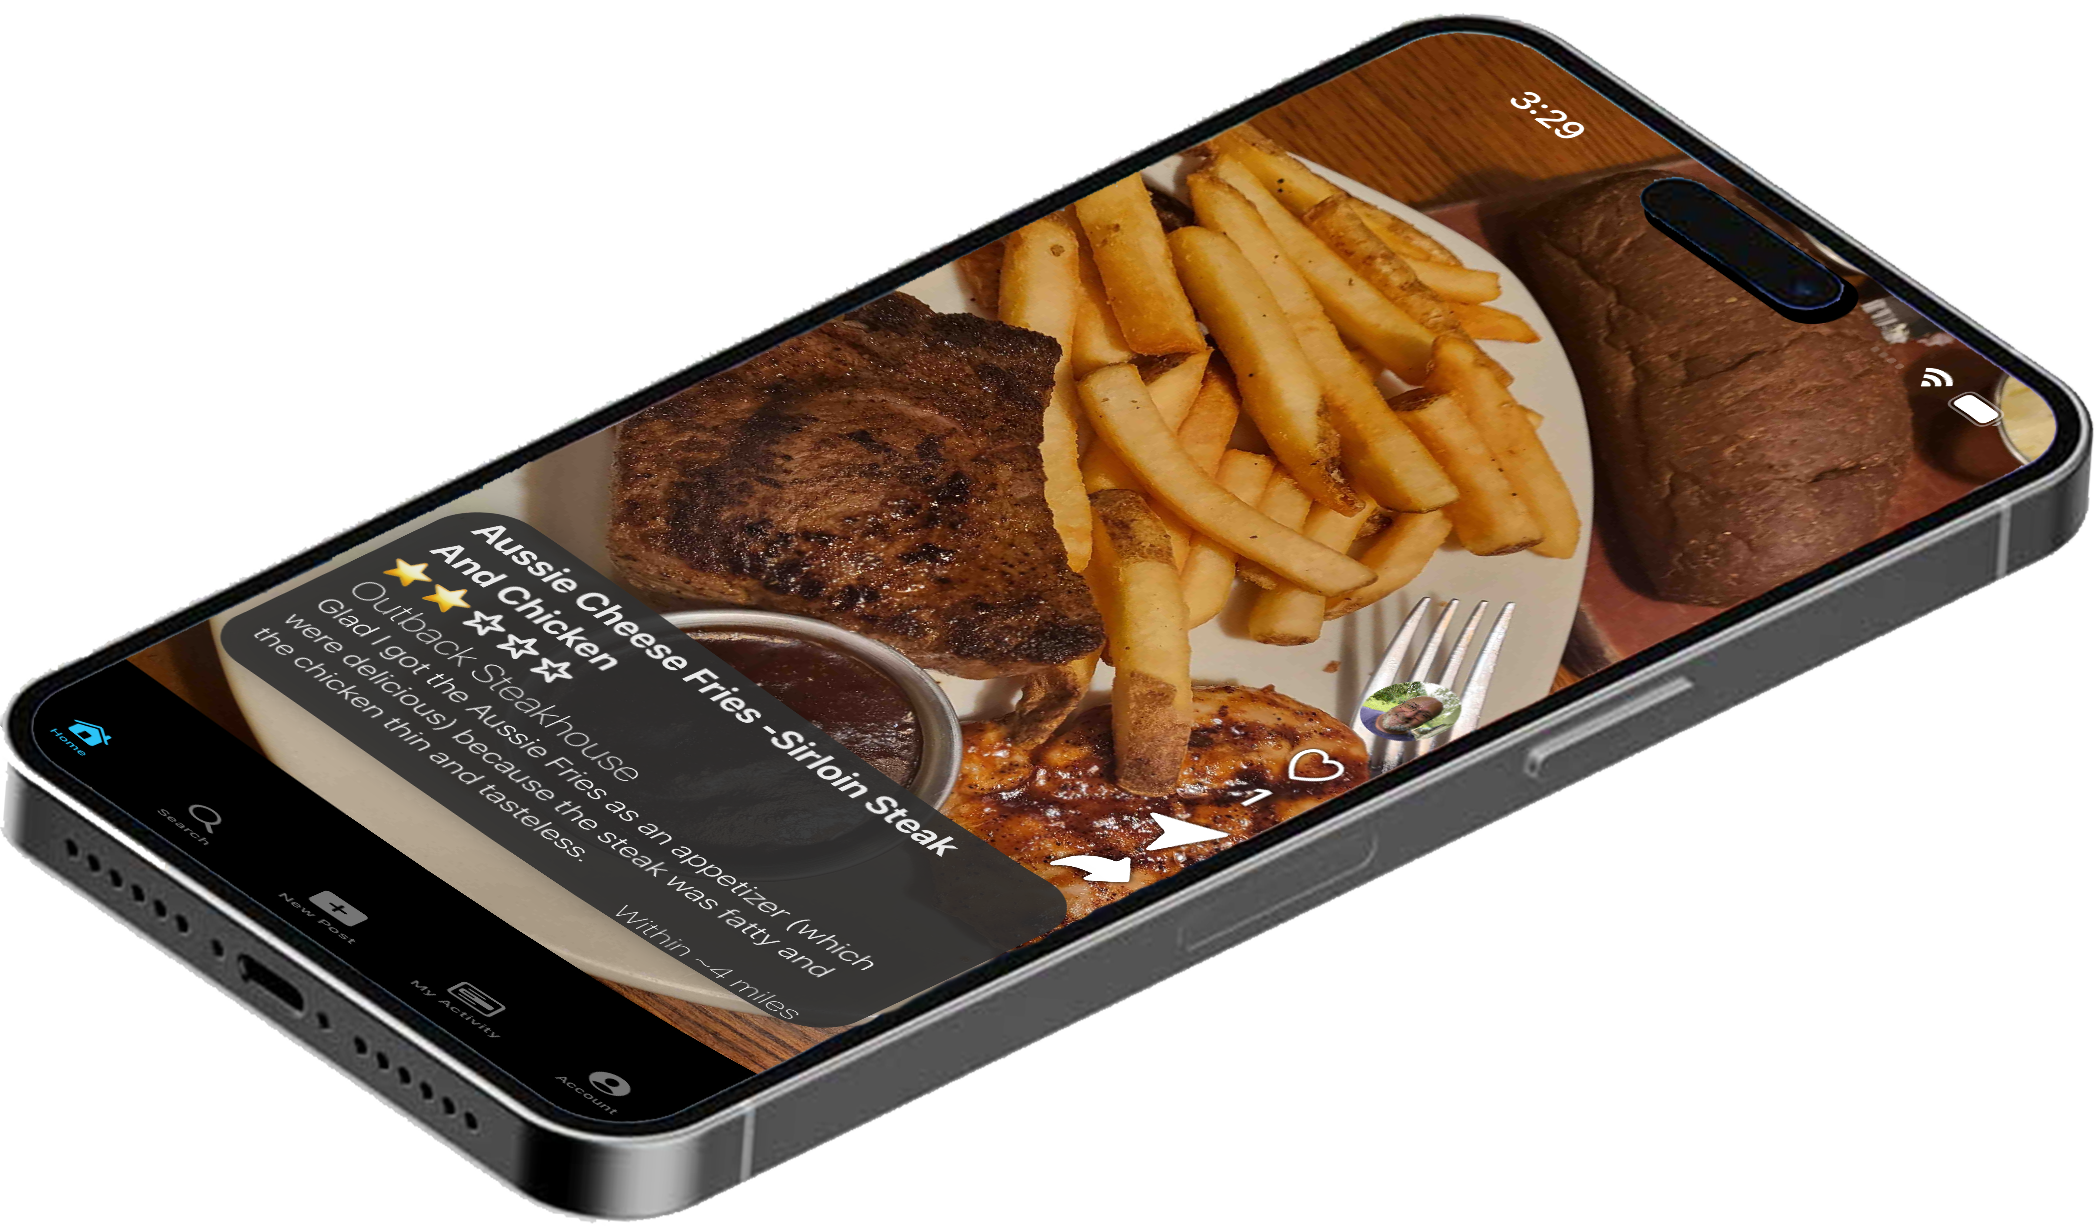 Our EATS on iphone